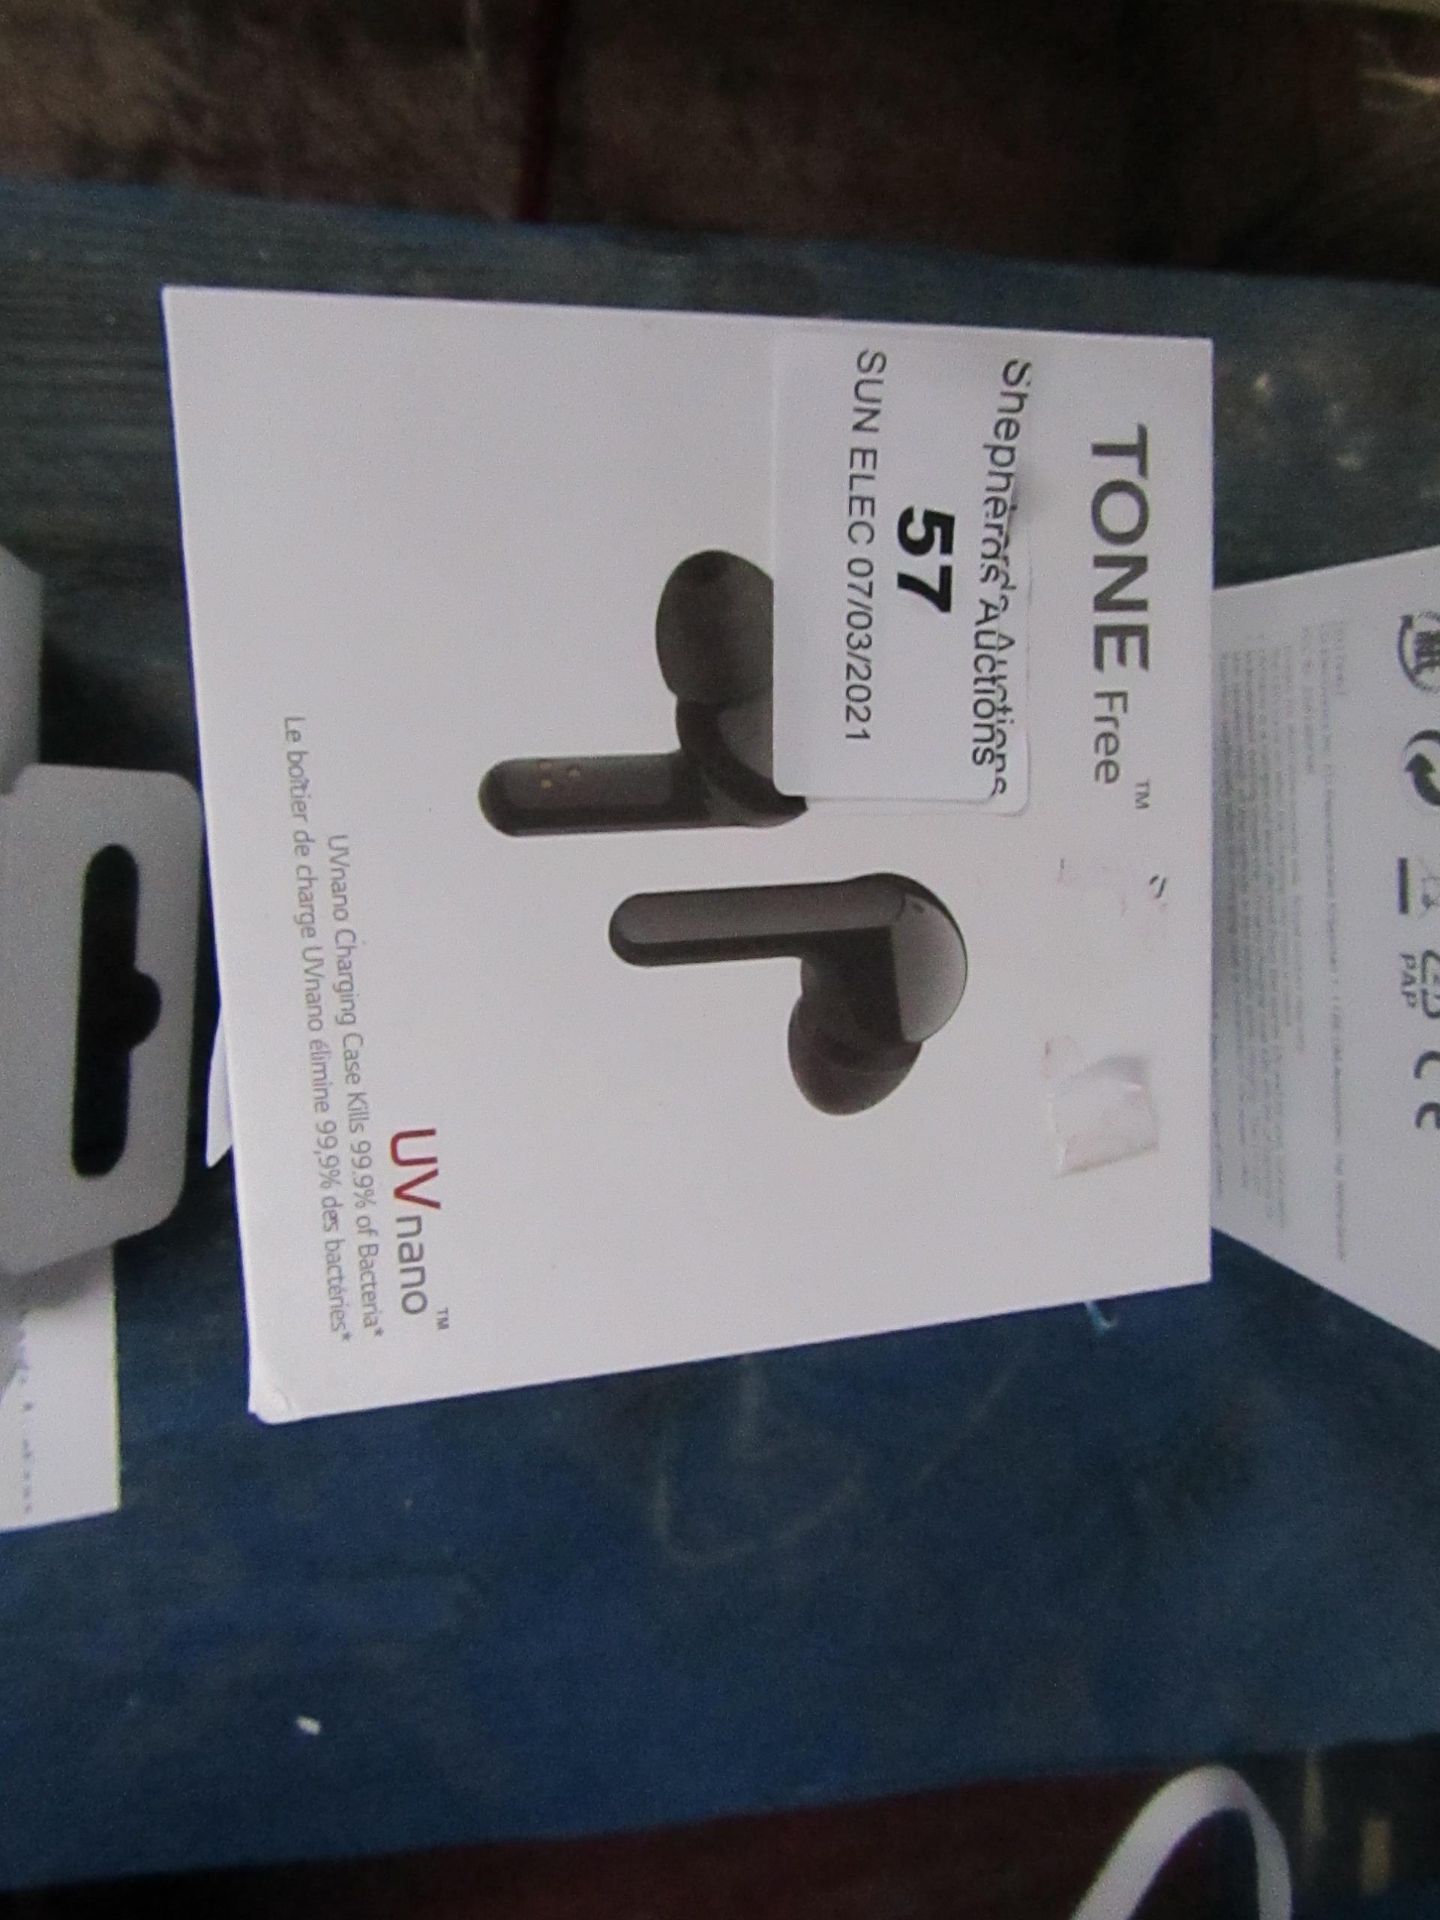 LG Tone Free Wireless earphones with charging case, unchecked as they have run out of charge, RRP £